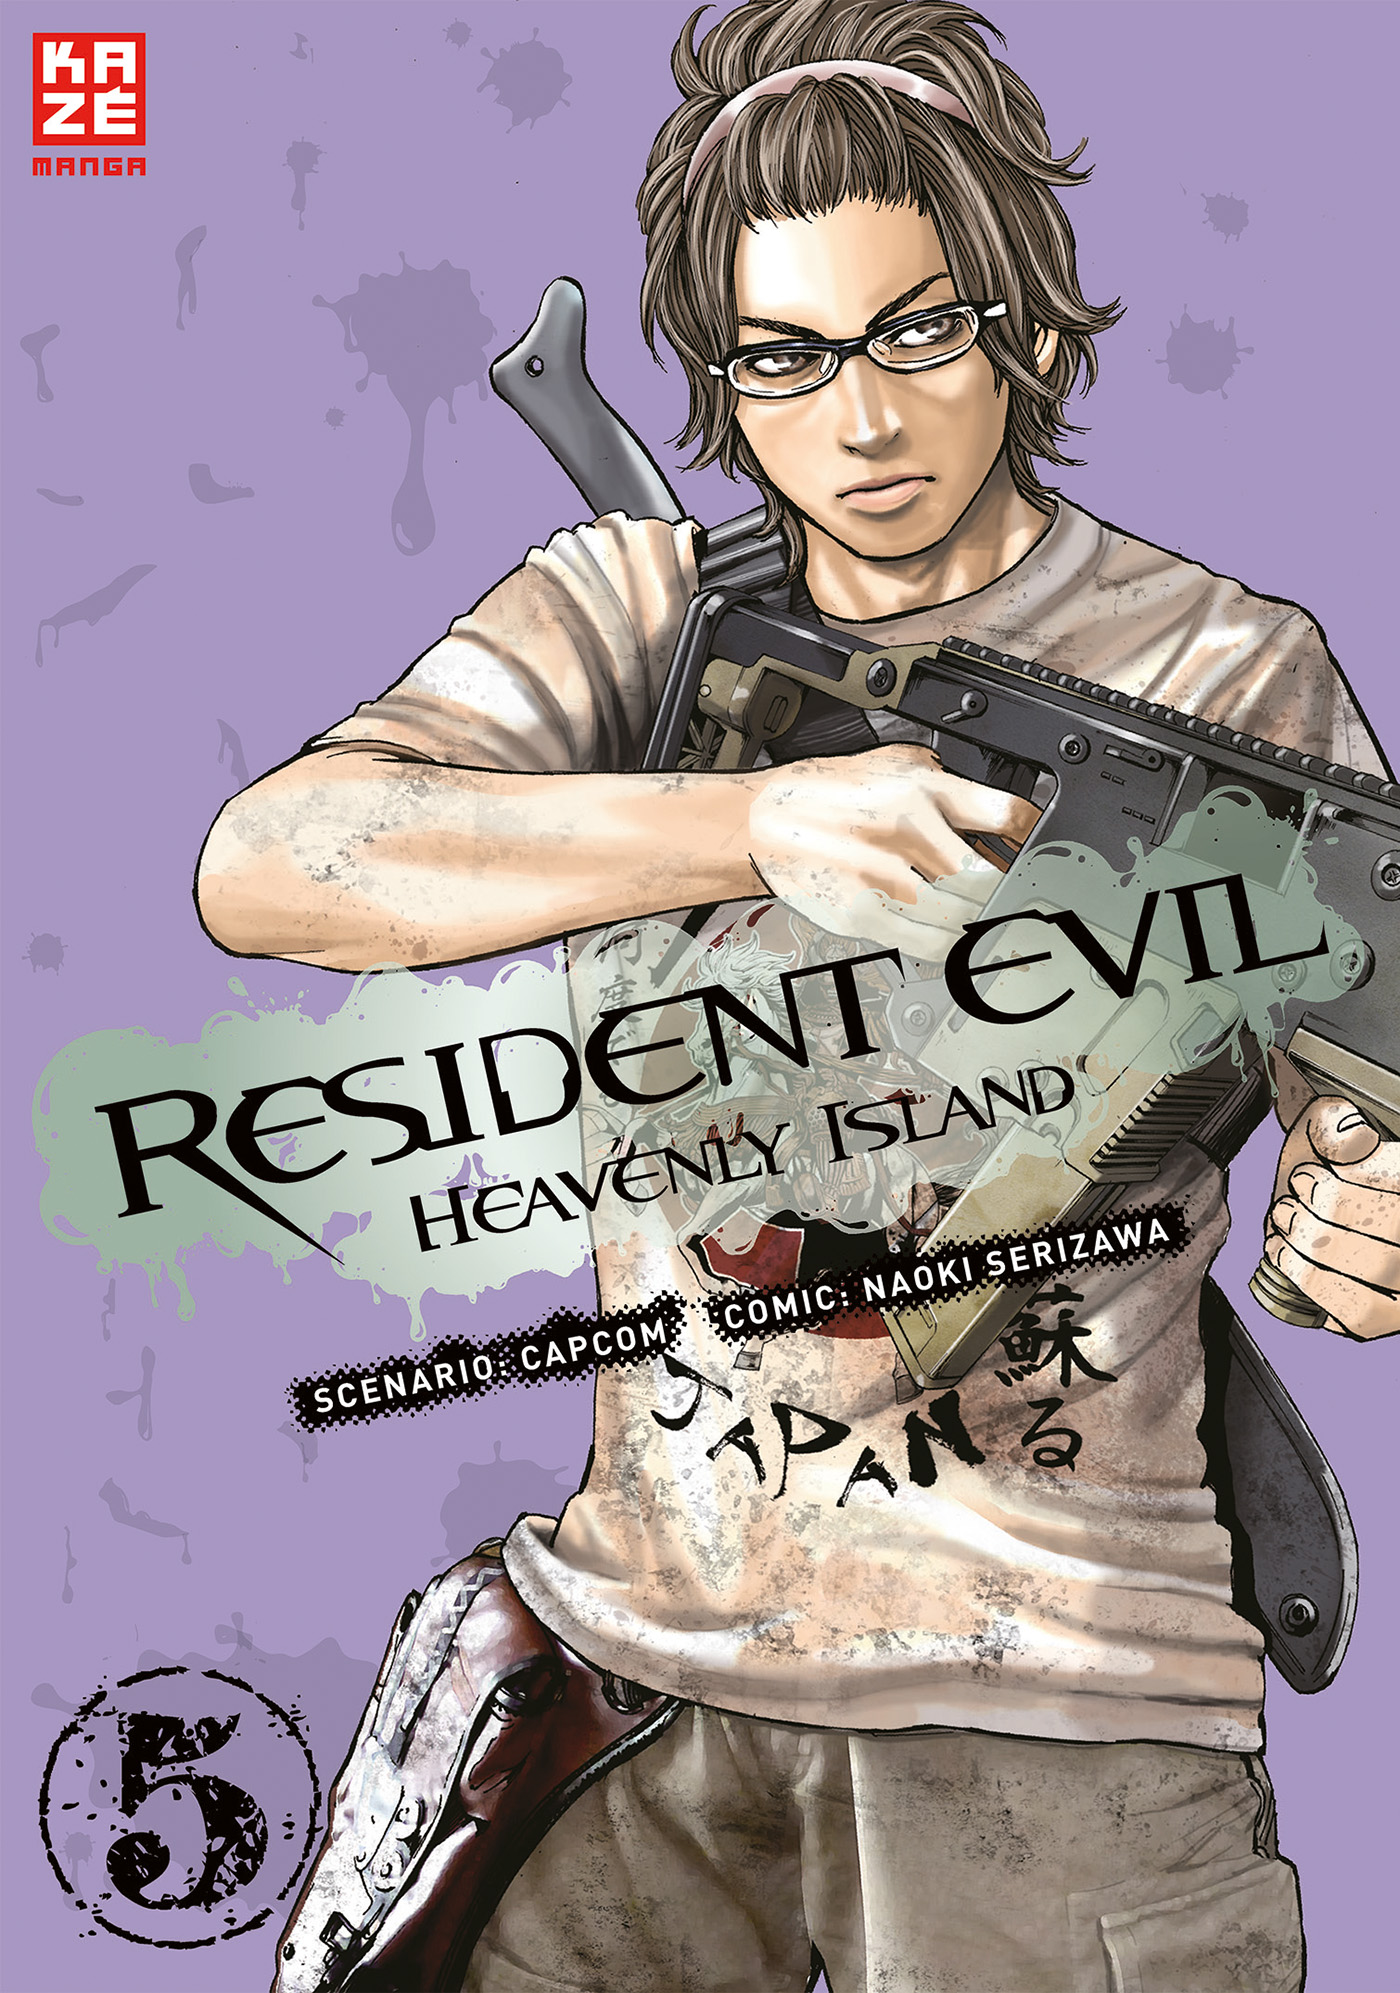 Resident Evil – – (Finale) Heavenly 5 Band Island